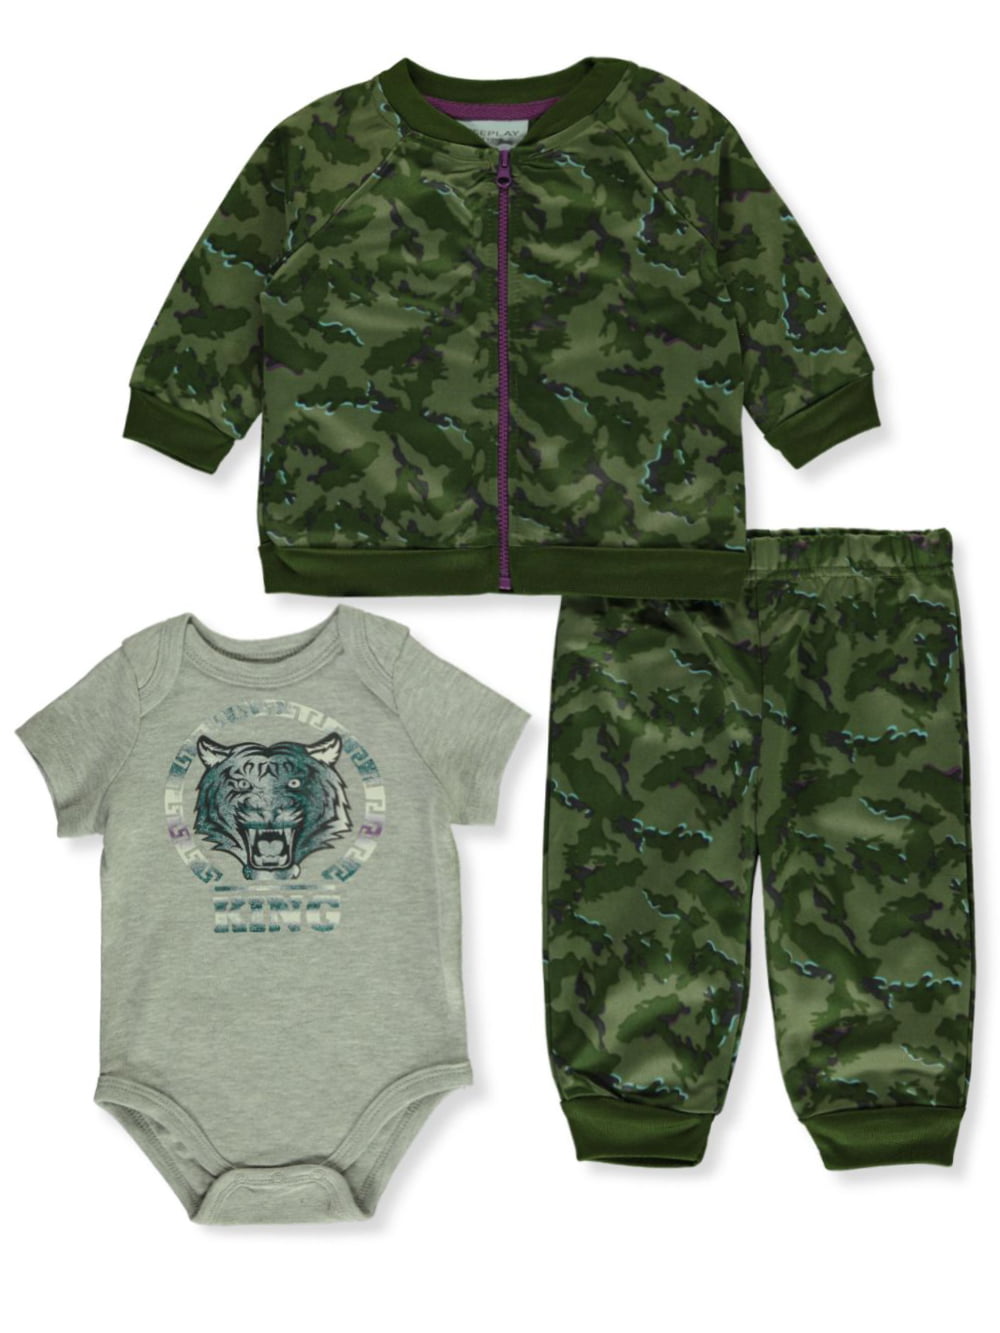 NEW Baby Boys 3 piece Outfit 3-6 Mos Bodysuit Pants Bib Set Camouflage Hunting 